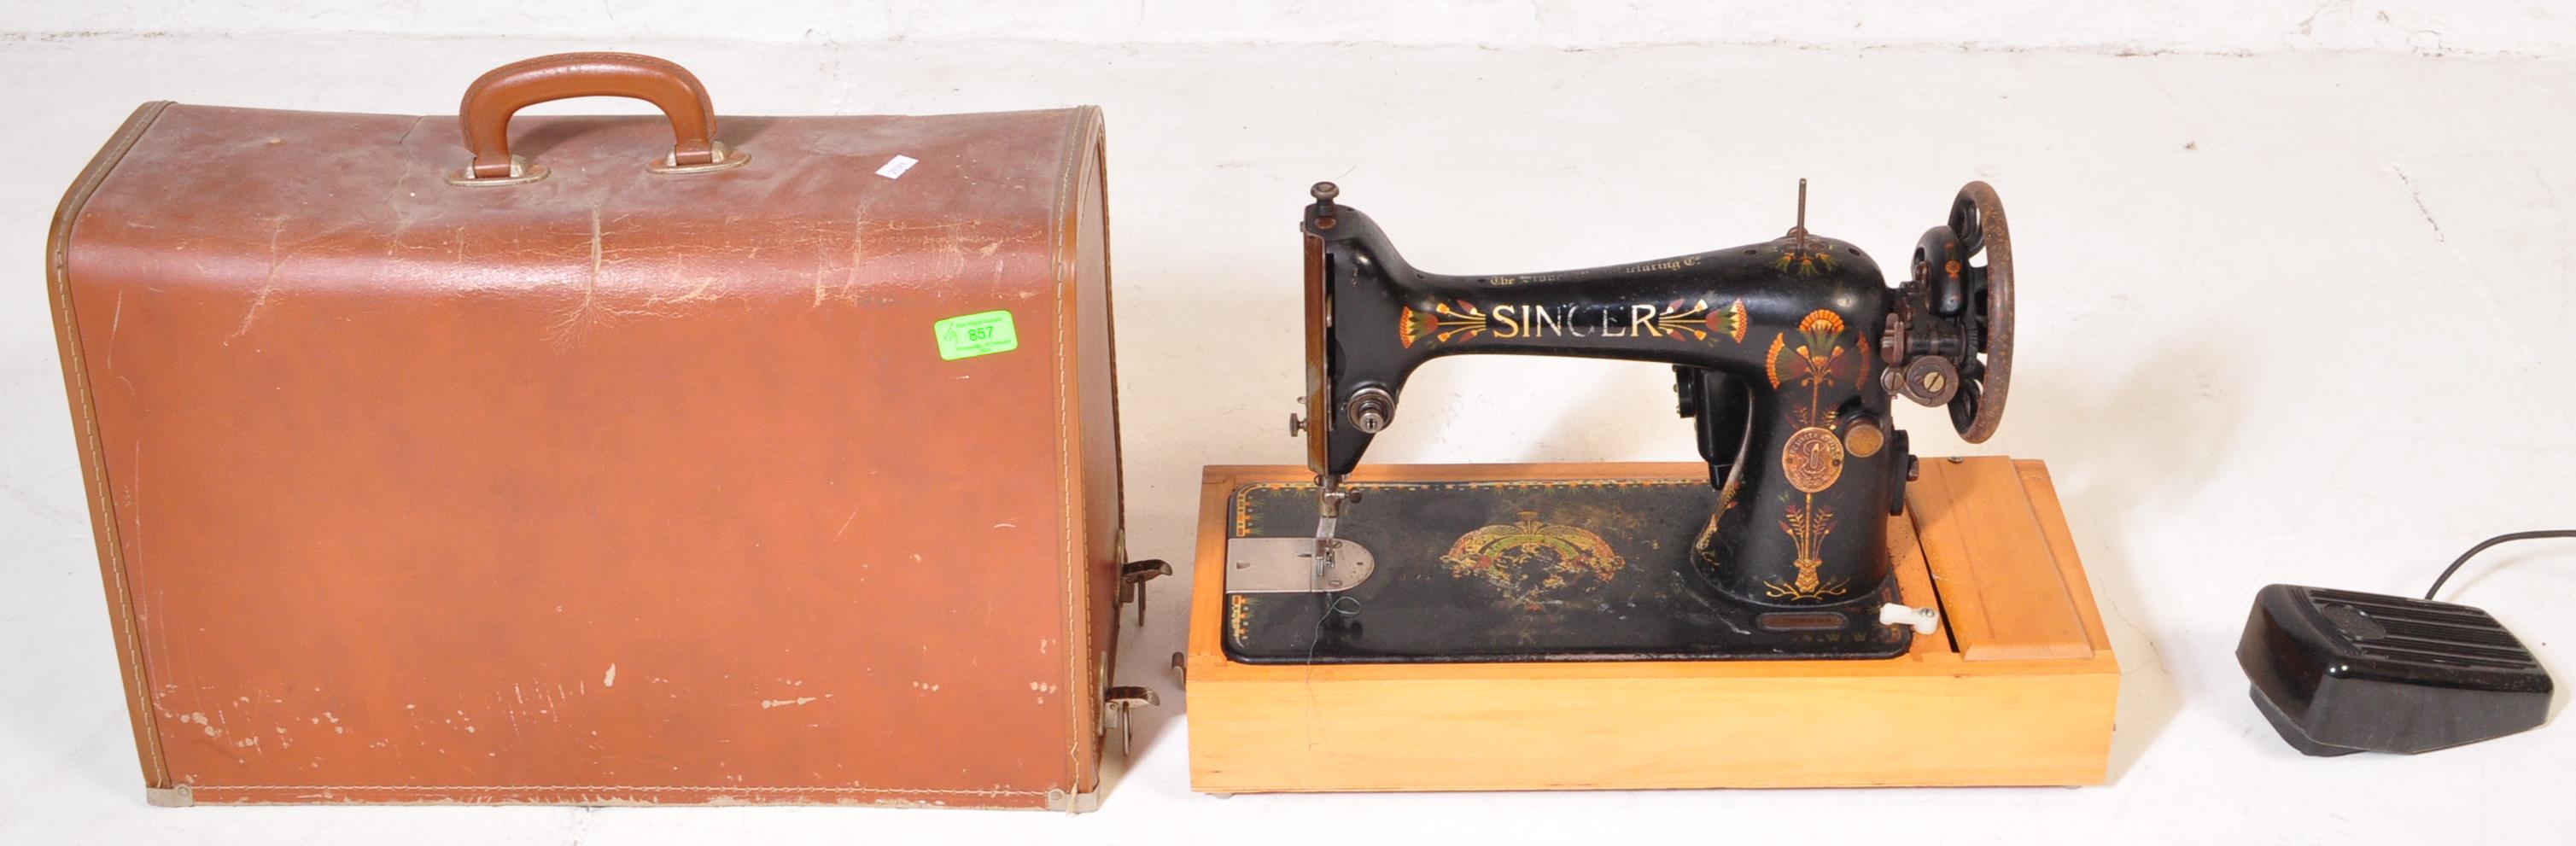 SINGER SEWING MACHINE - EARLY 20TH CENTURY - LEATHER CASE - Image 2 of 6